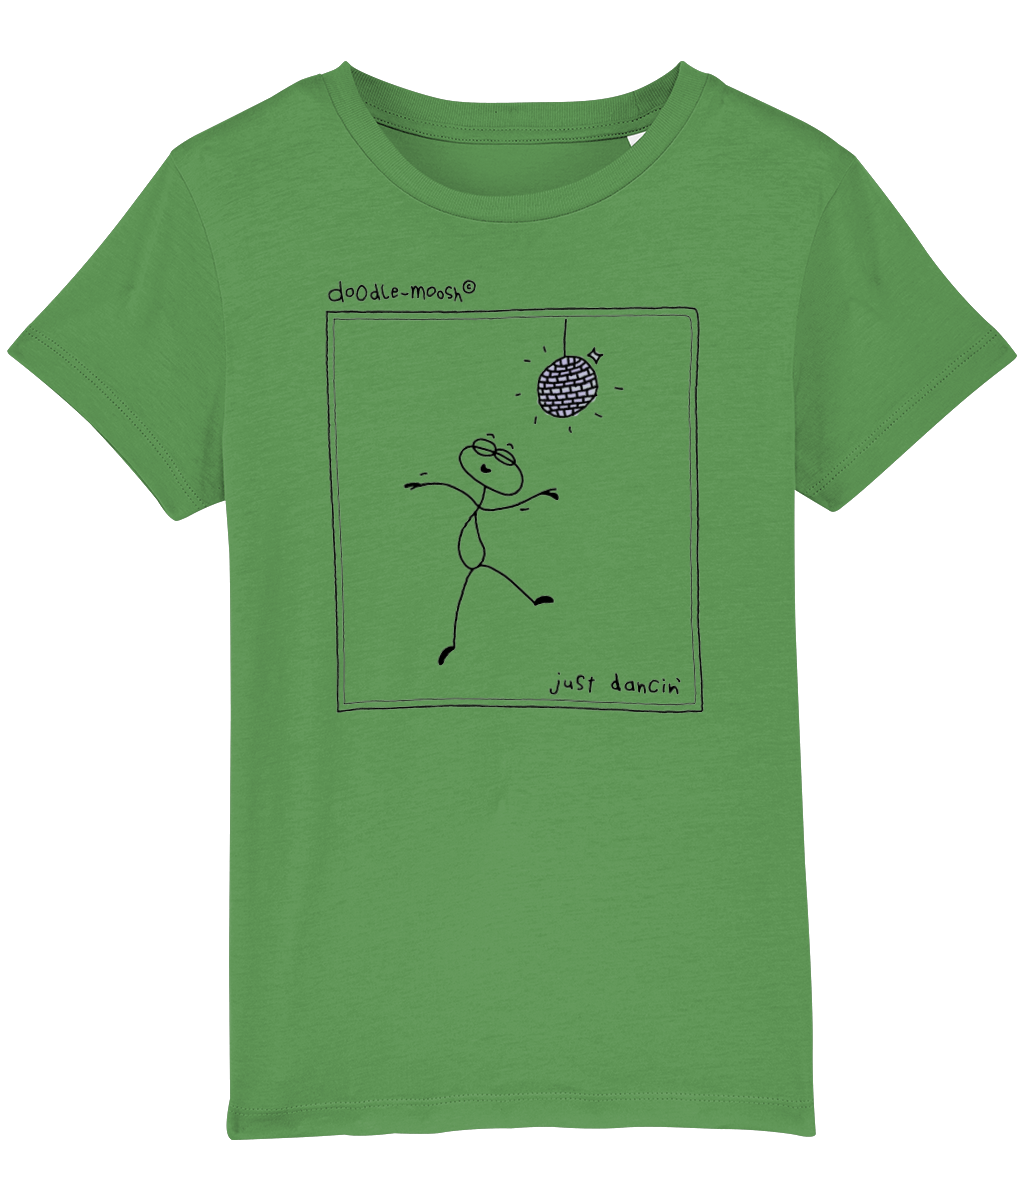 Just dancing t-shirt, green with black, colorful drawing